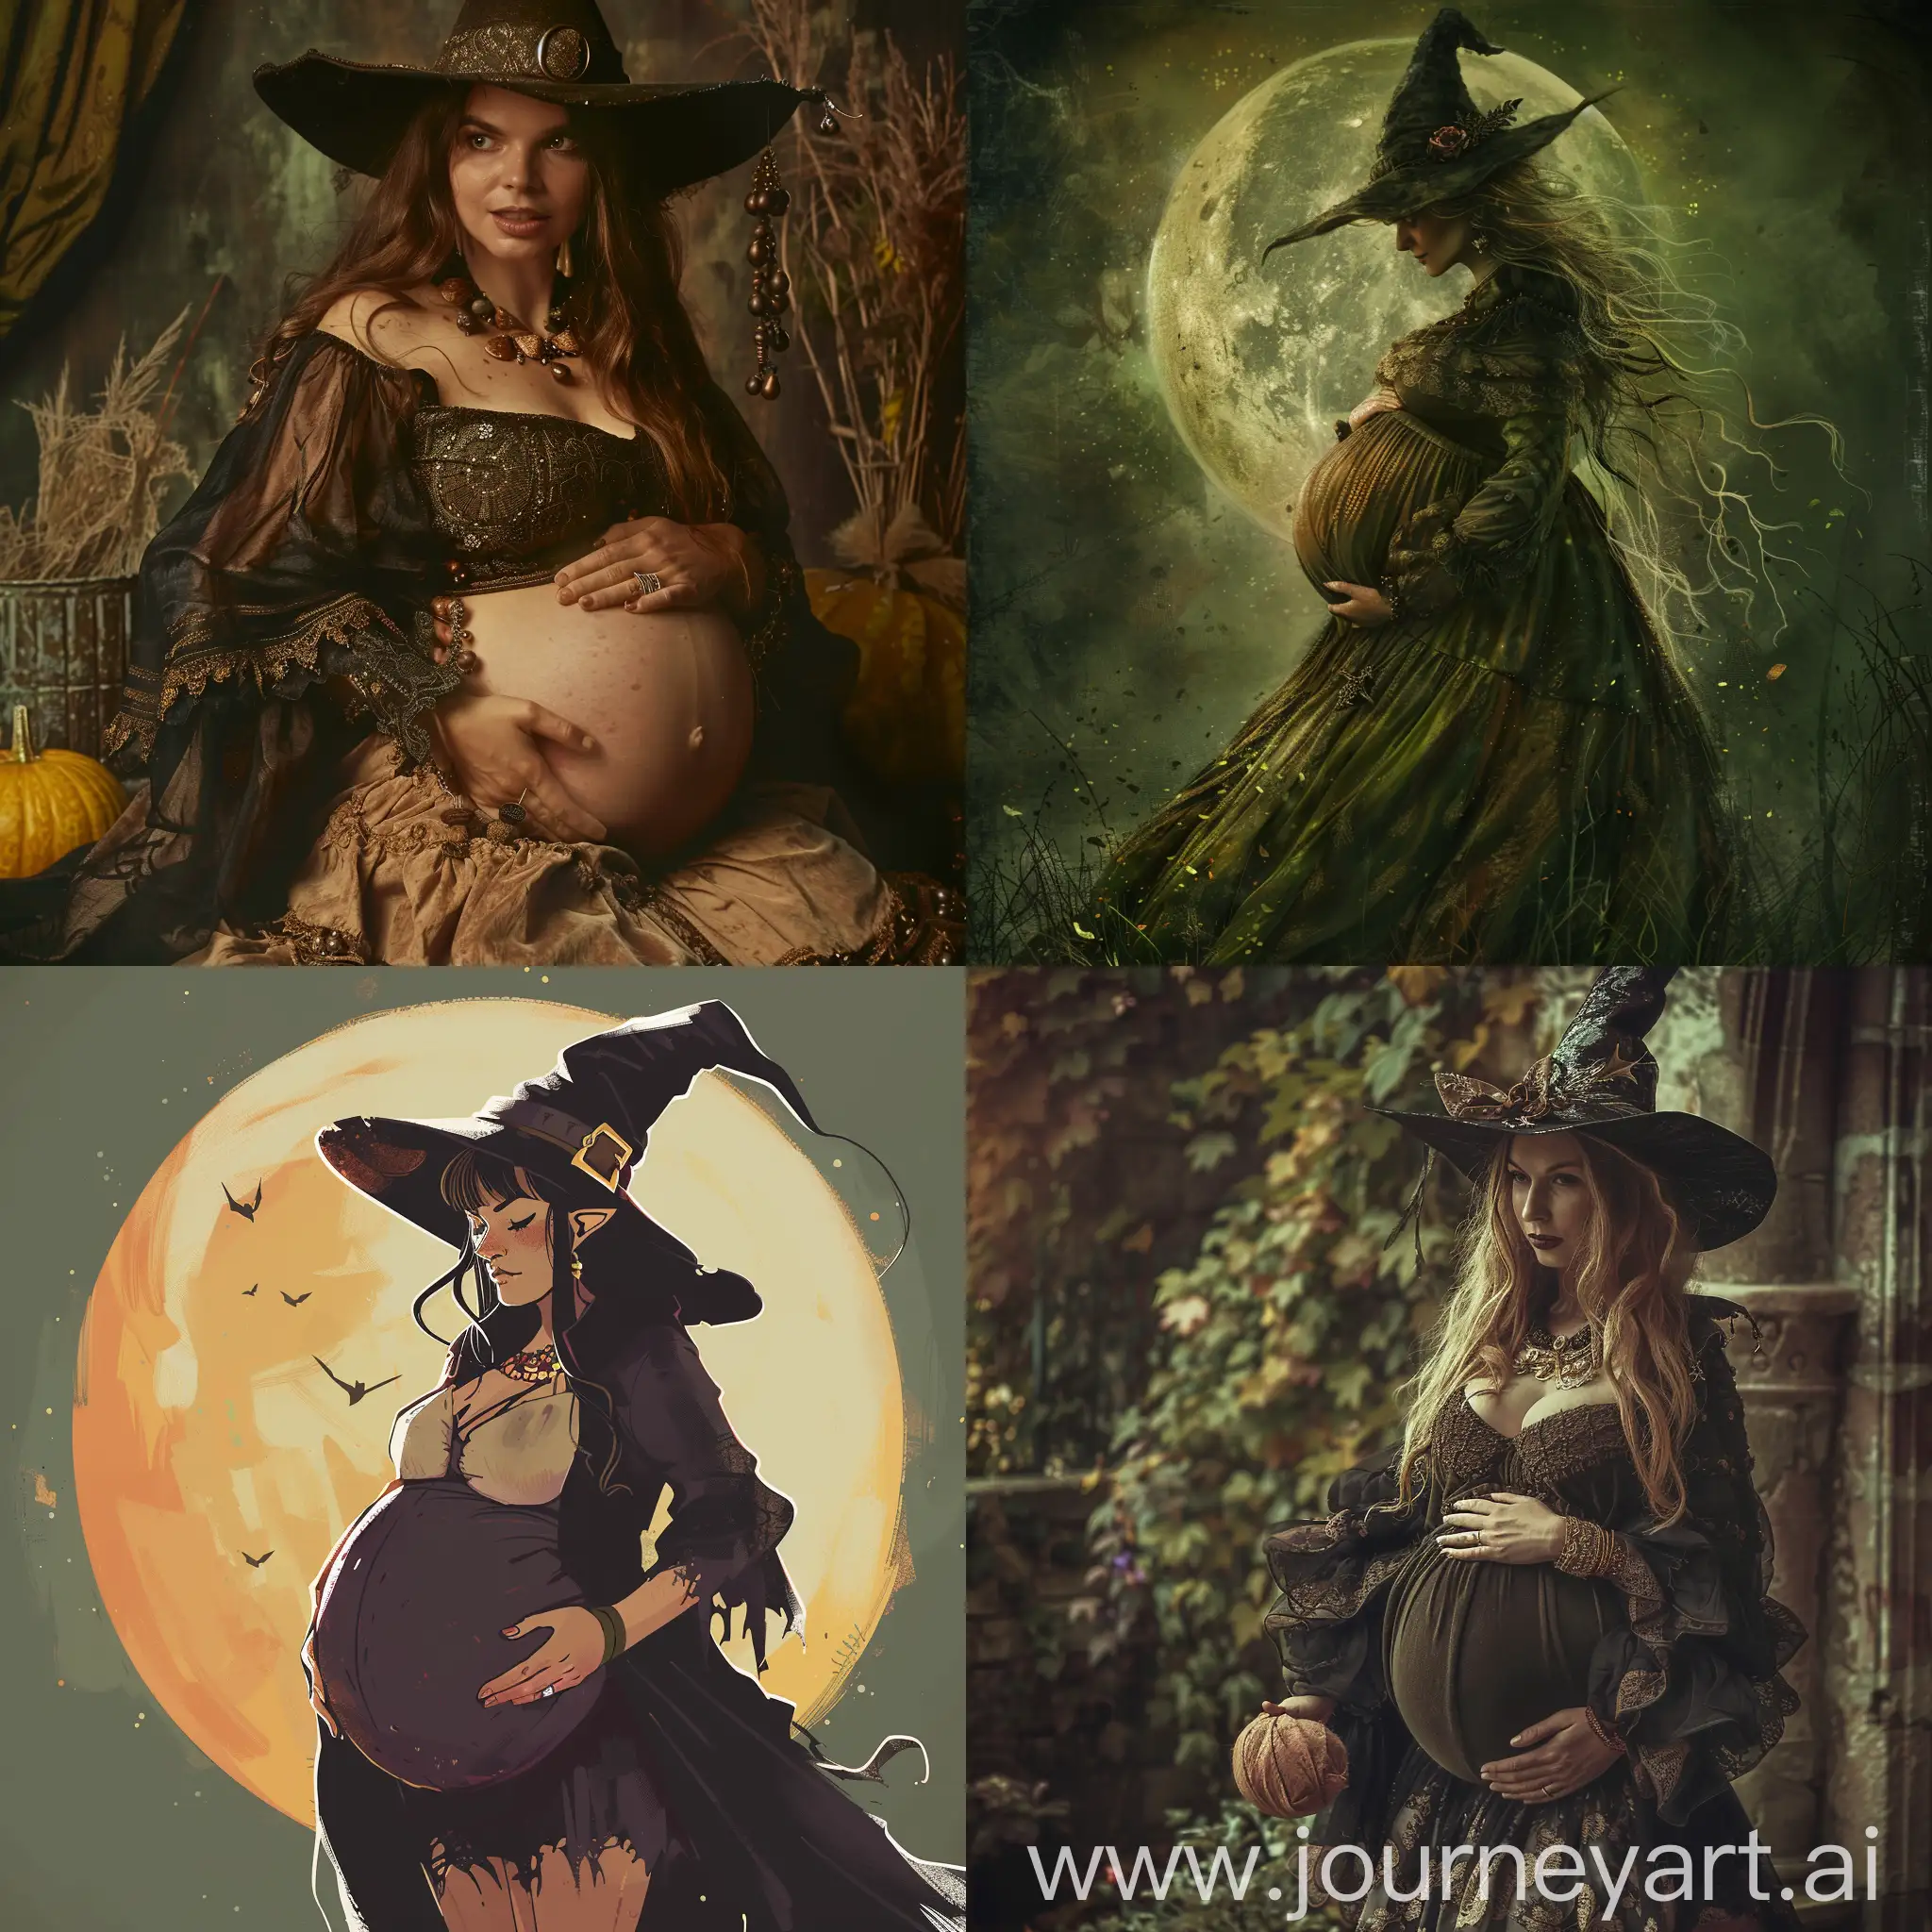 Pregnant-Witch-Casting-Spell-in-Moonlit-Forest